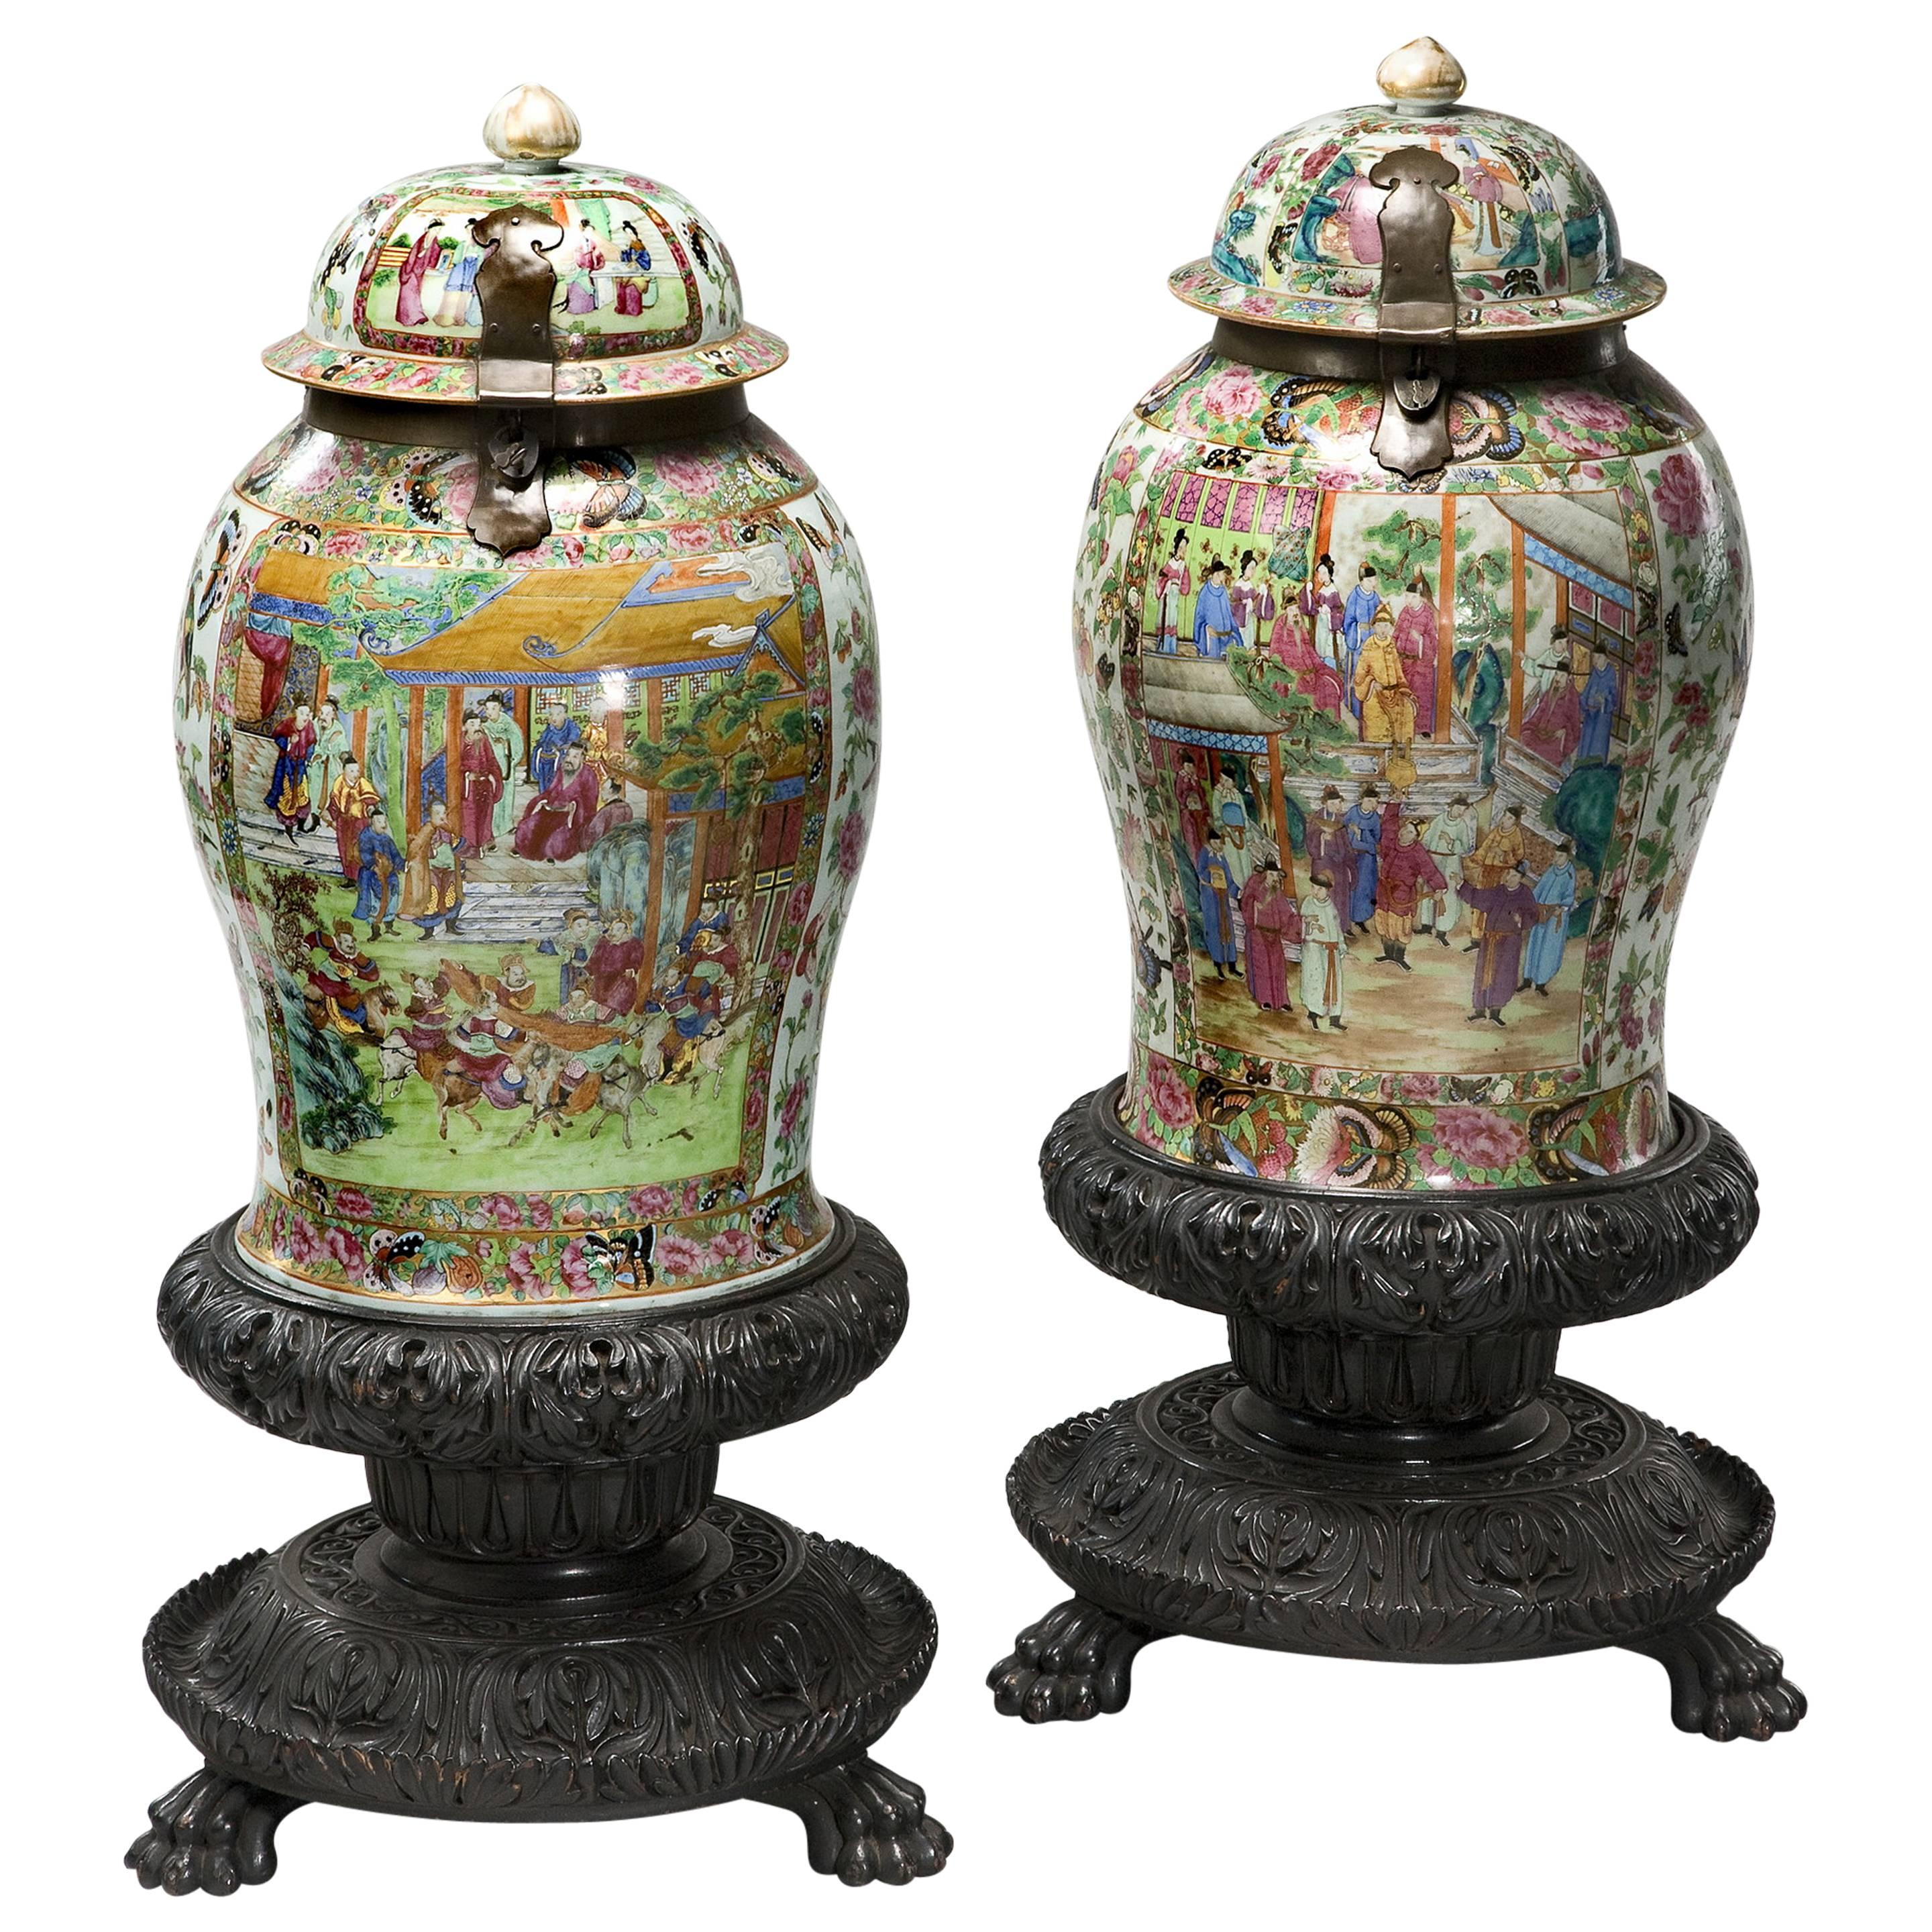 Matched Pair of Cantonese Enameled Porcelain Standing Jars